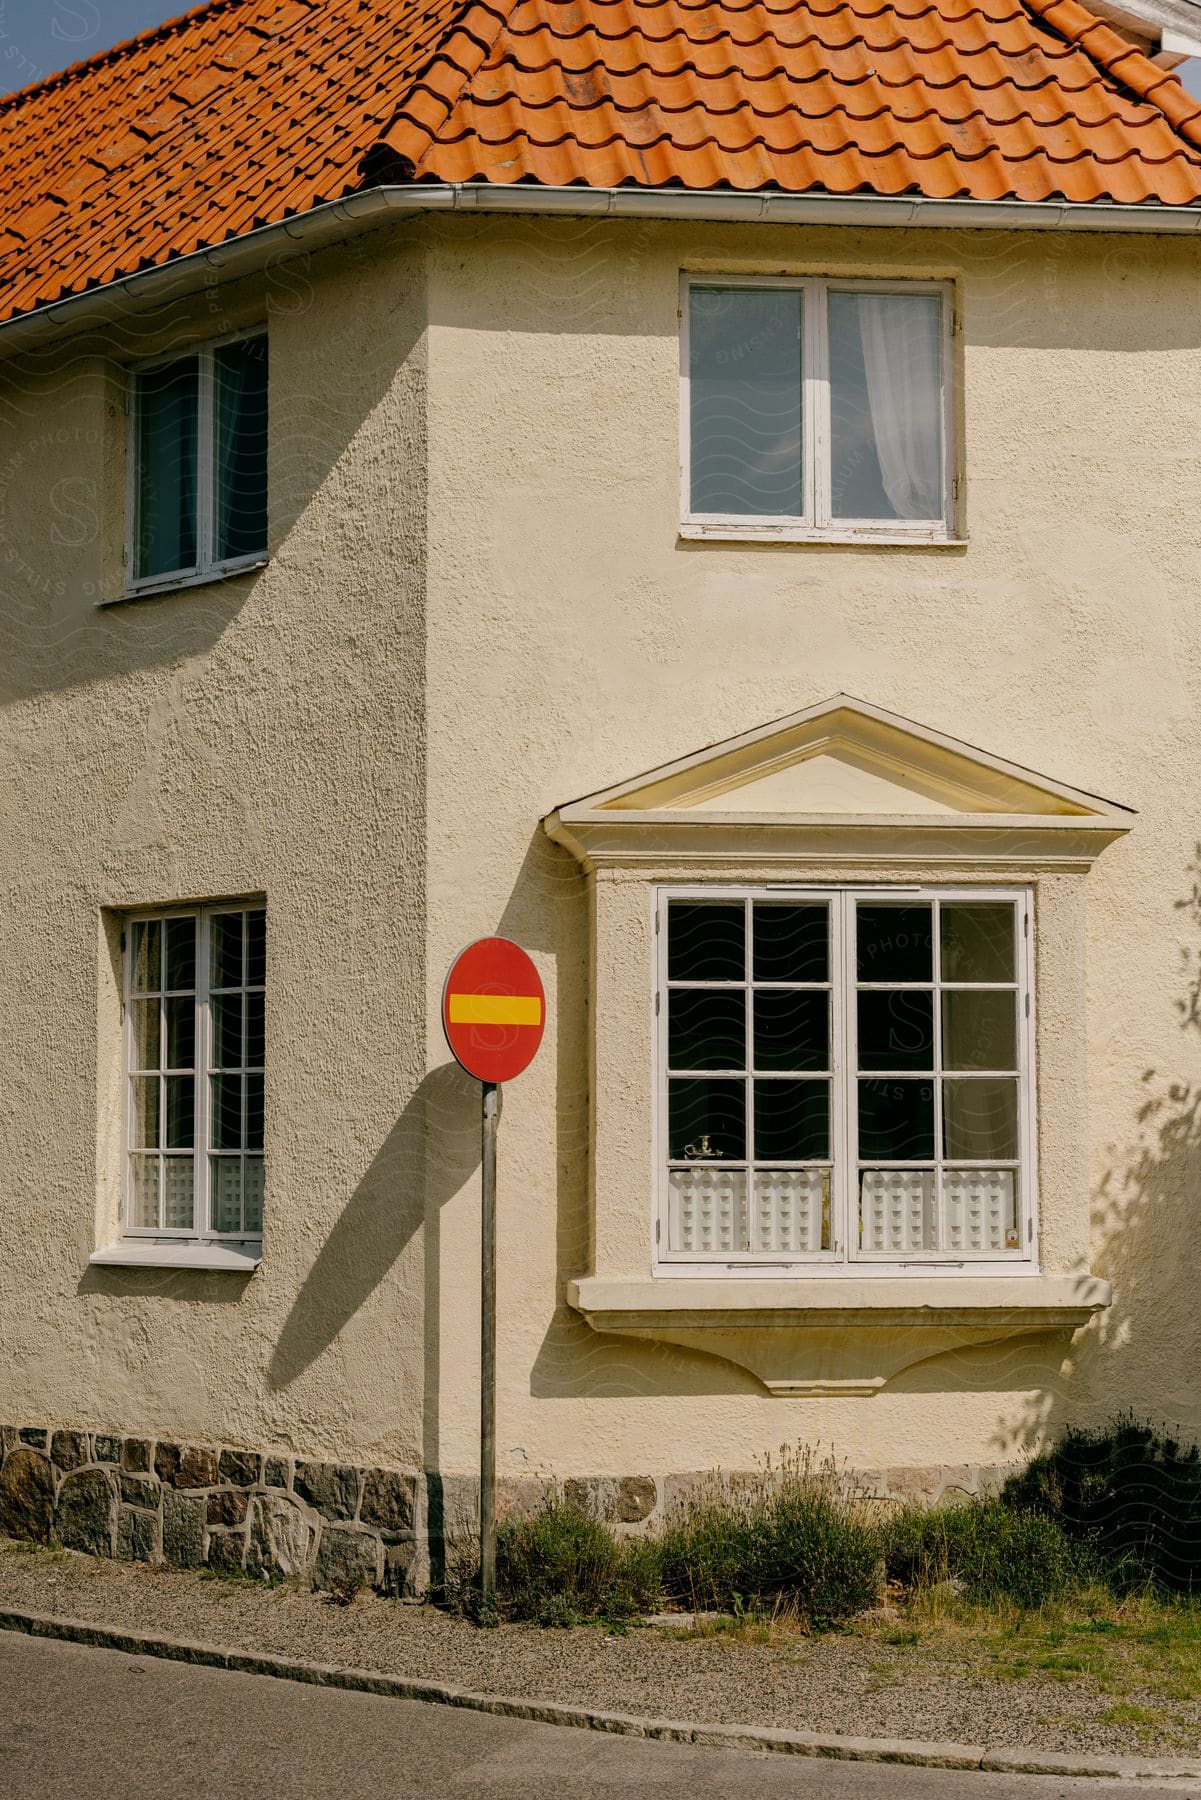 A round red sign stands next to the windows of a house close to the street of a neighborhood